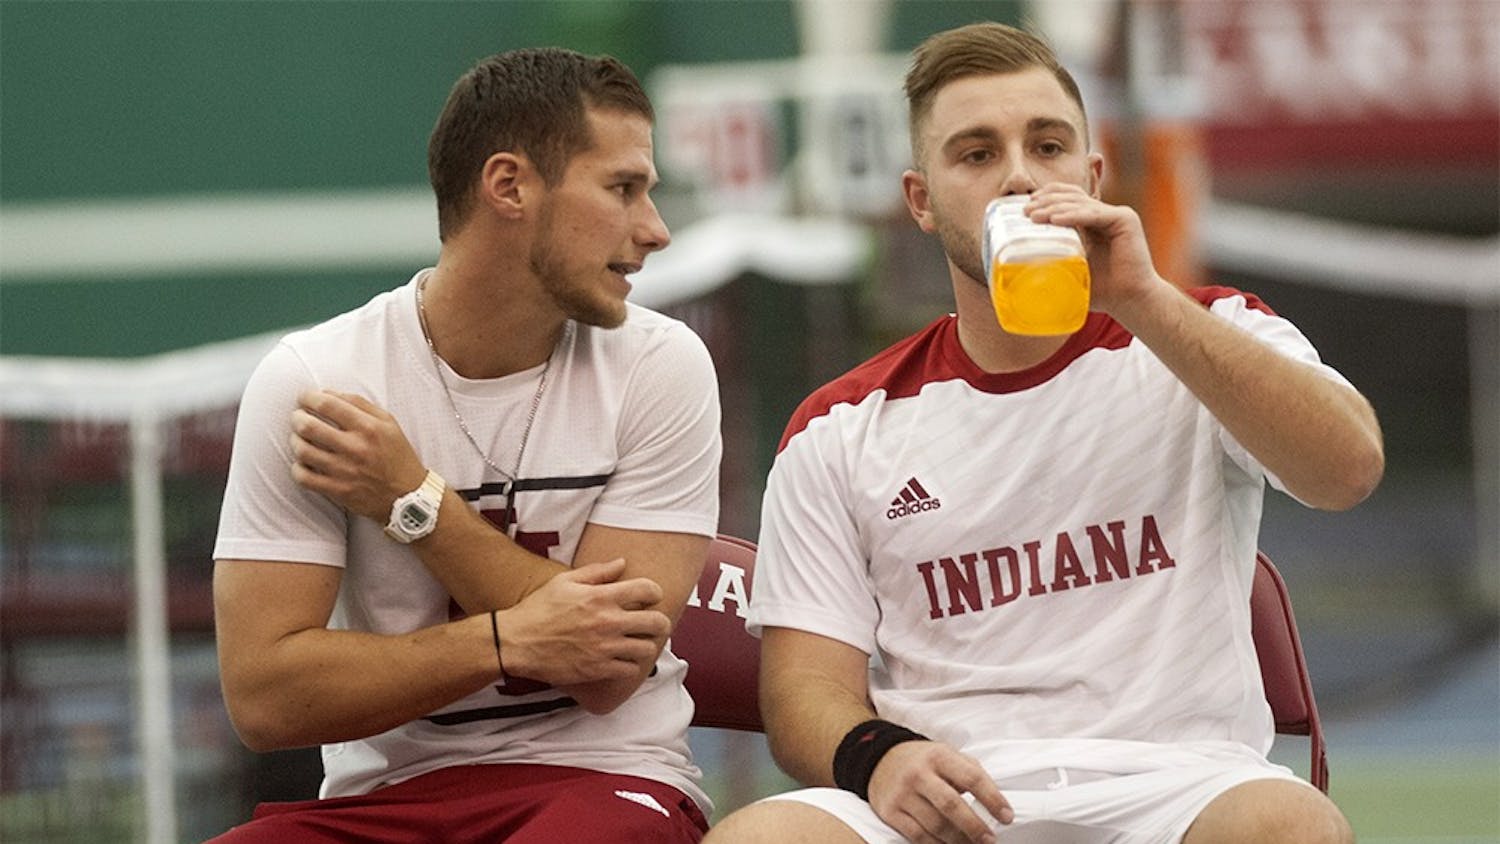 Sven Lalic, left, Volunteer Assistant Coach, speaks to Daniel Bednarczyk during IU's Men's Tennis match against Washington on Feb. 6 at the IU Tennis Center. 